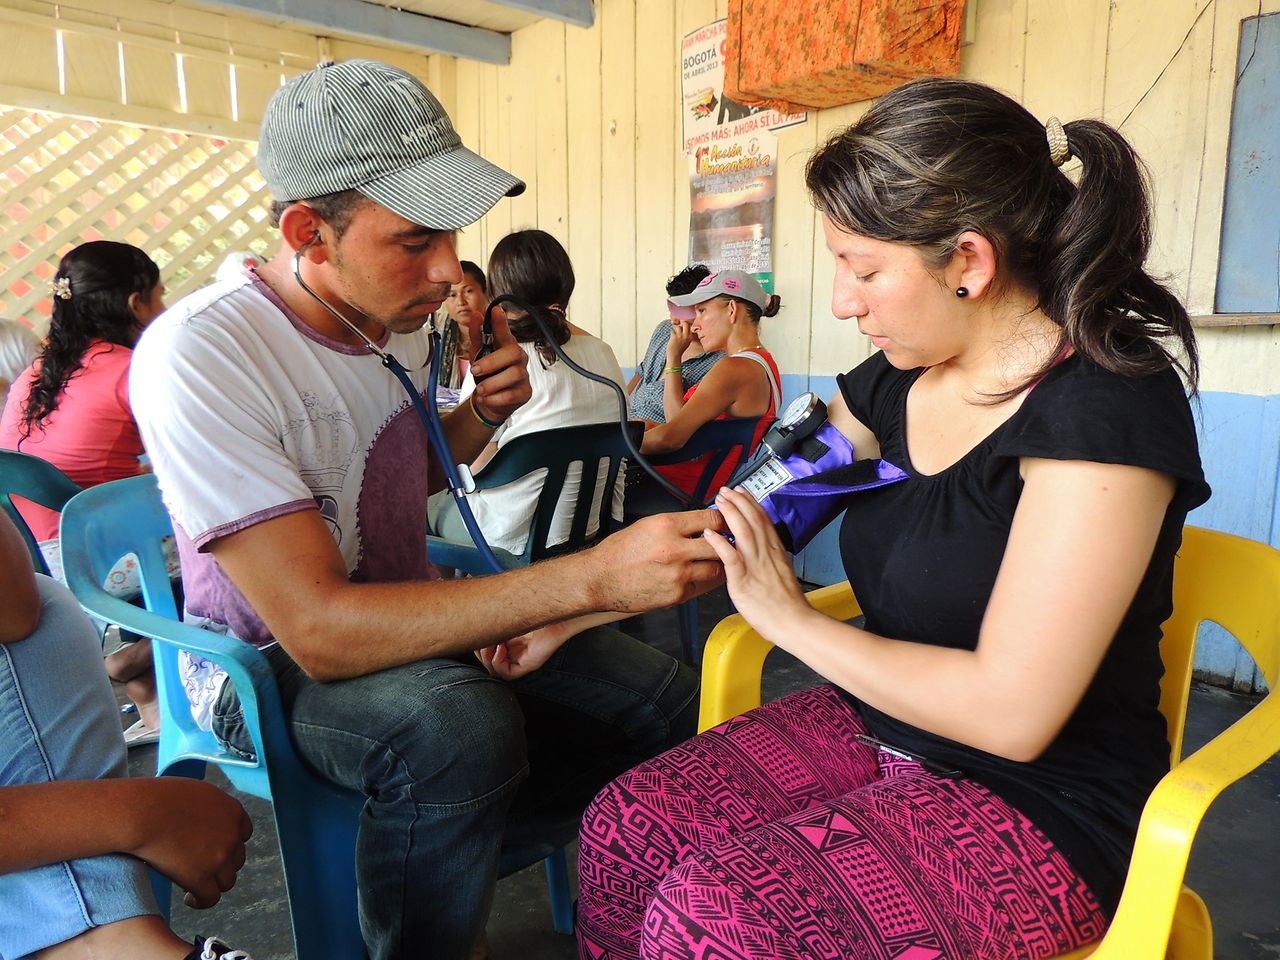 With the help of a medical student (right), a member of the Valle del Río Cimitarra community learns how to measure blood pressure.